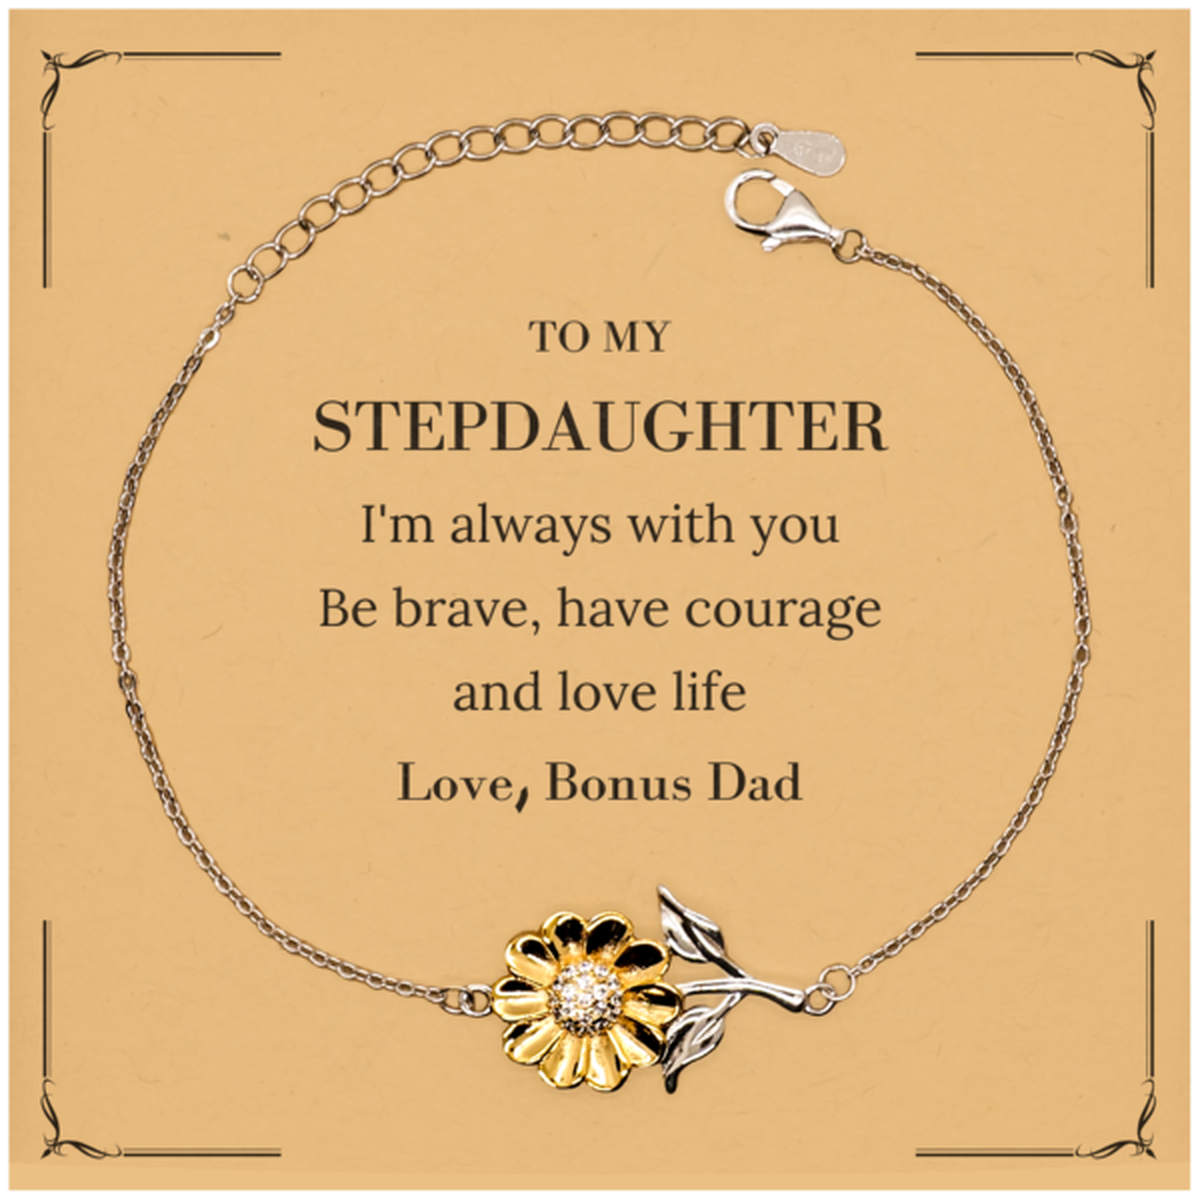 To My Stepdaughter Gifts from Bonus Dad, Unique Sunflower Bracelet Inspirational Christmas Birthday Graduation Gifts for Stepdaughter I'm always with you. Be brave, have courage and love life. Love, Bonus Dad